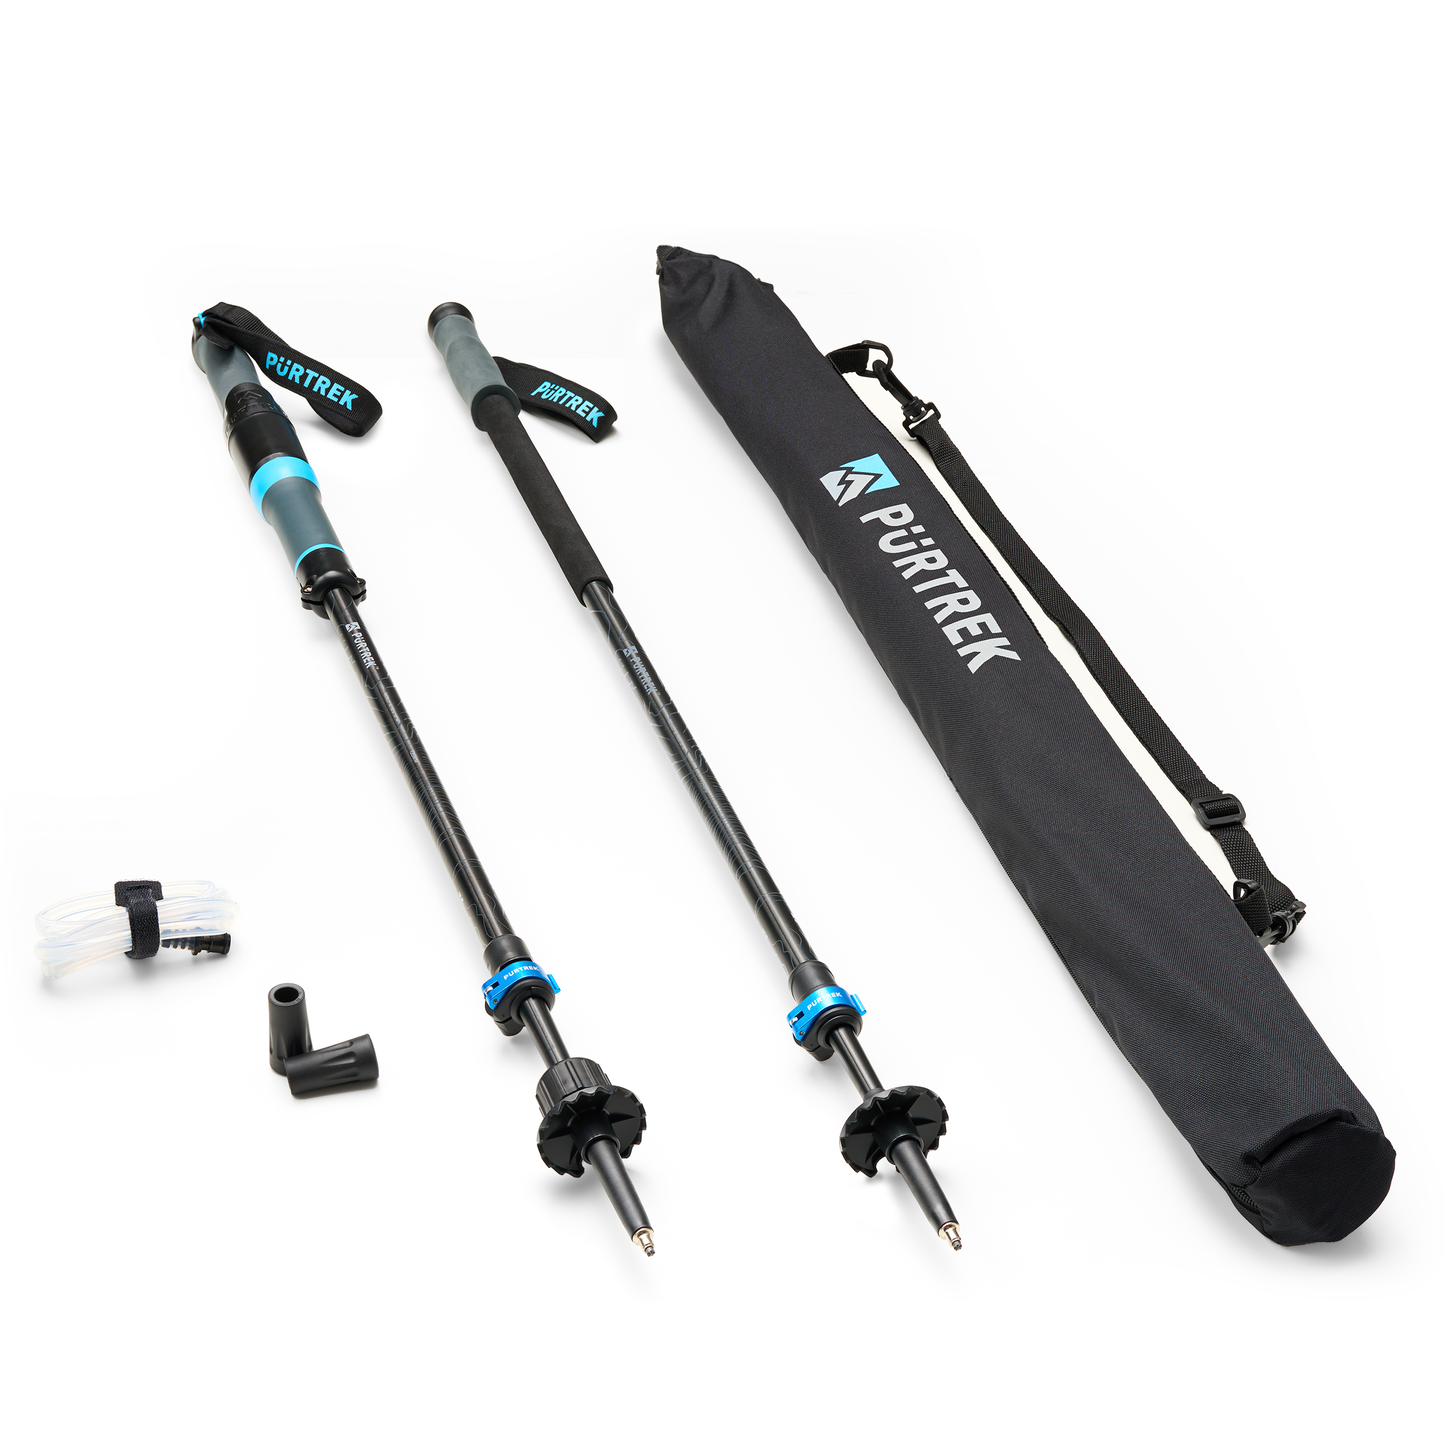 The PurTrek 2.0 Set gives you the incredible water filter/pump trekking pole, plus a 2nd basic trekking pole plus tube, tips and storage bag